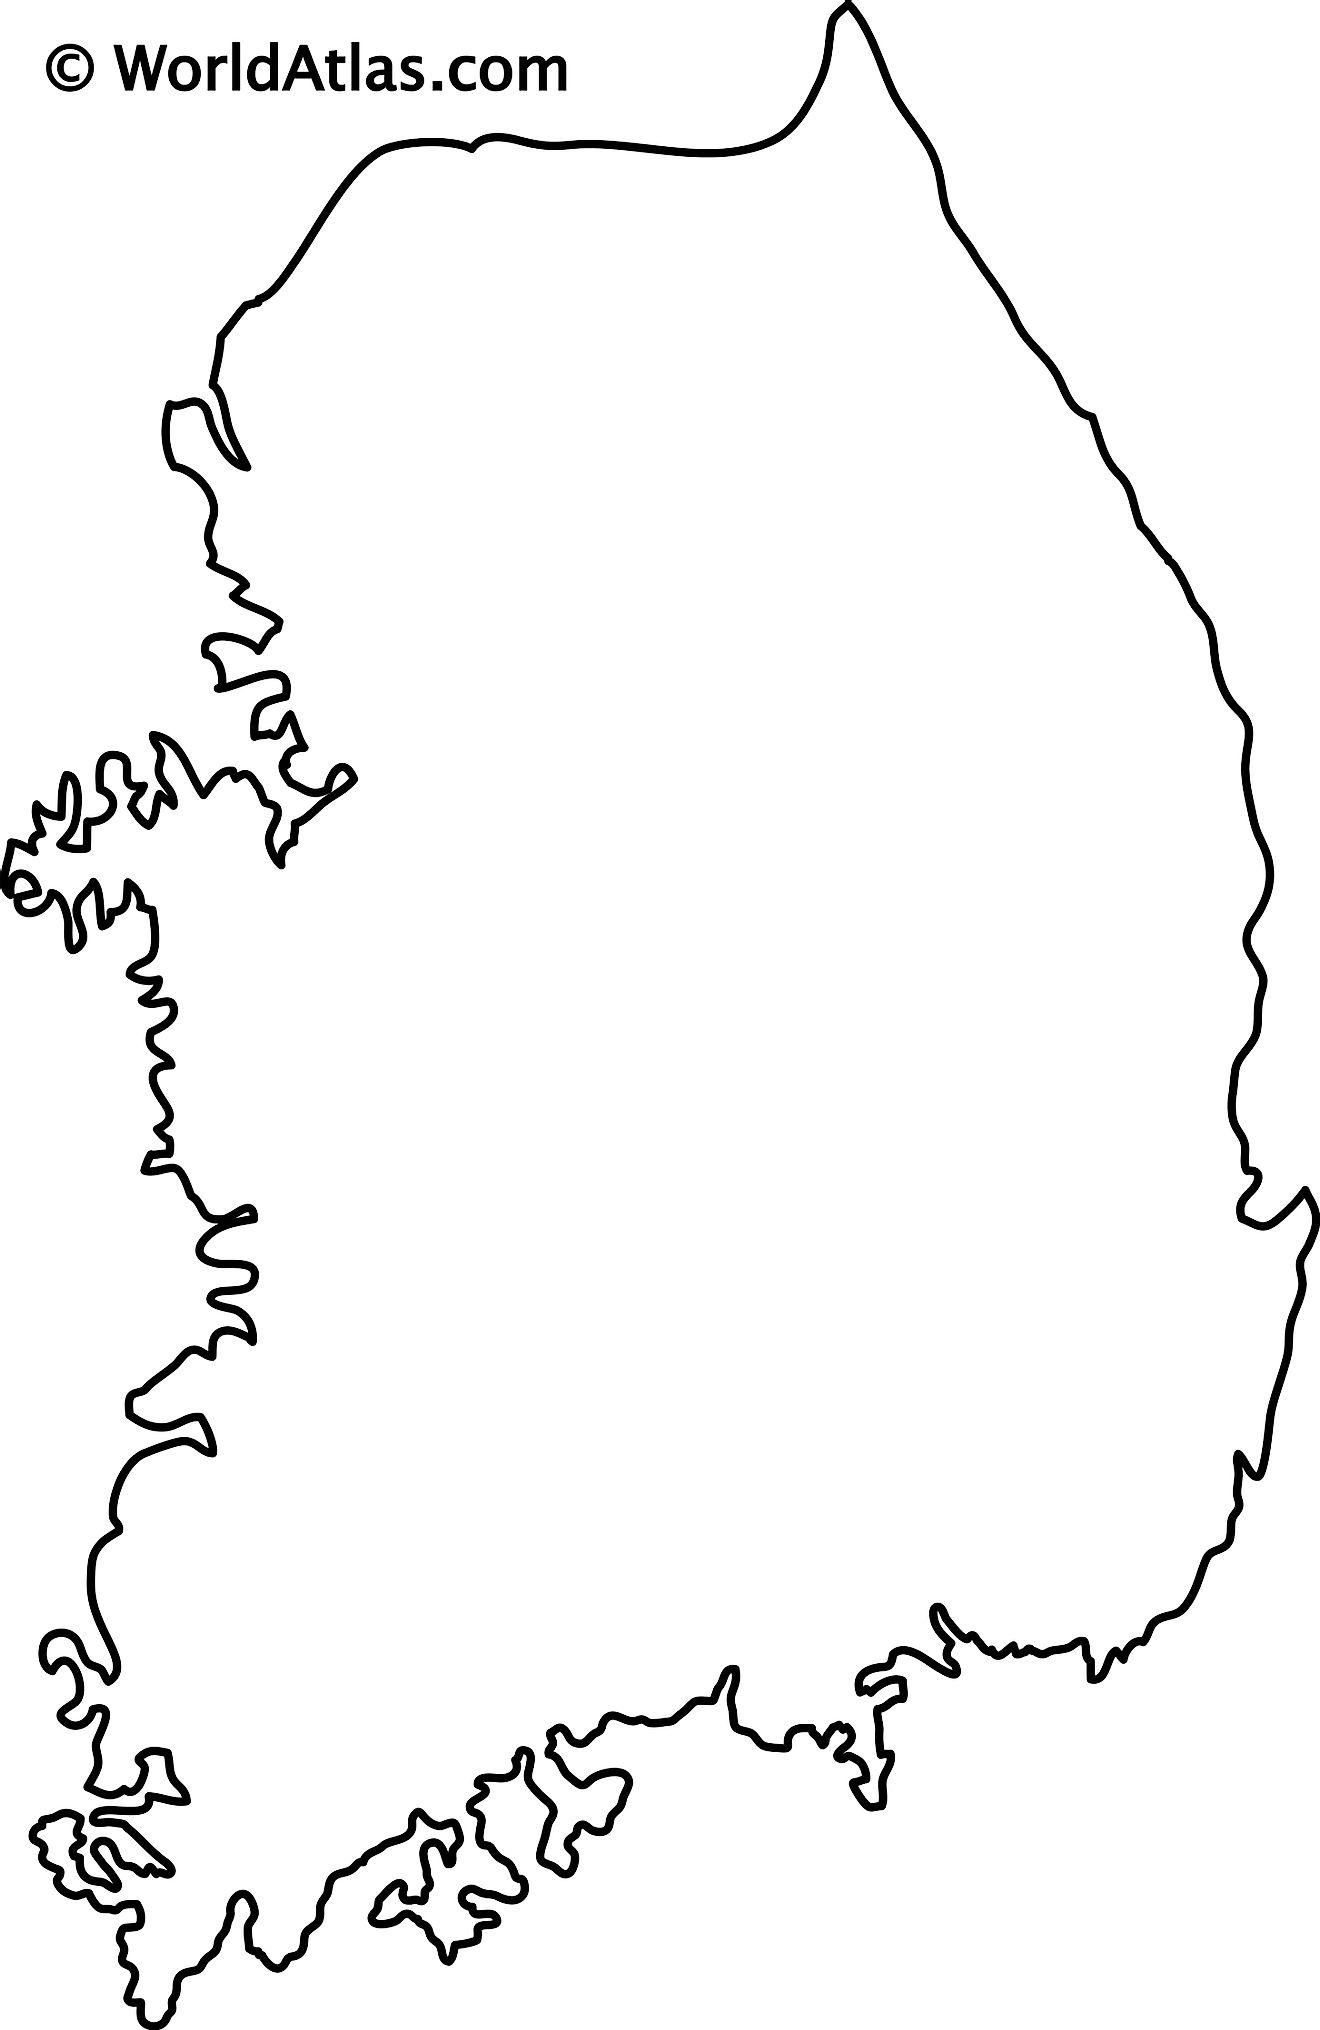 Blank Outline Map of South Korea